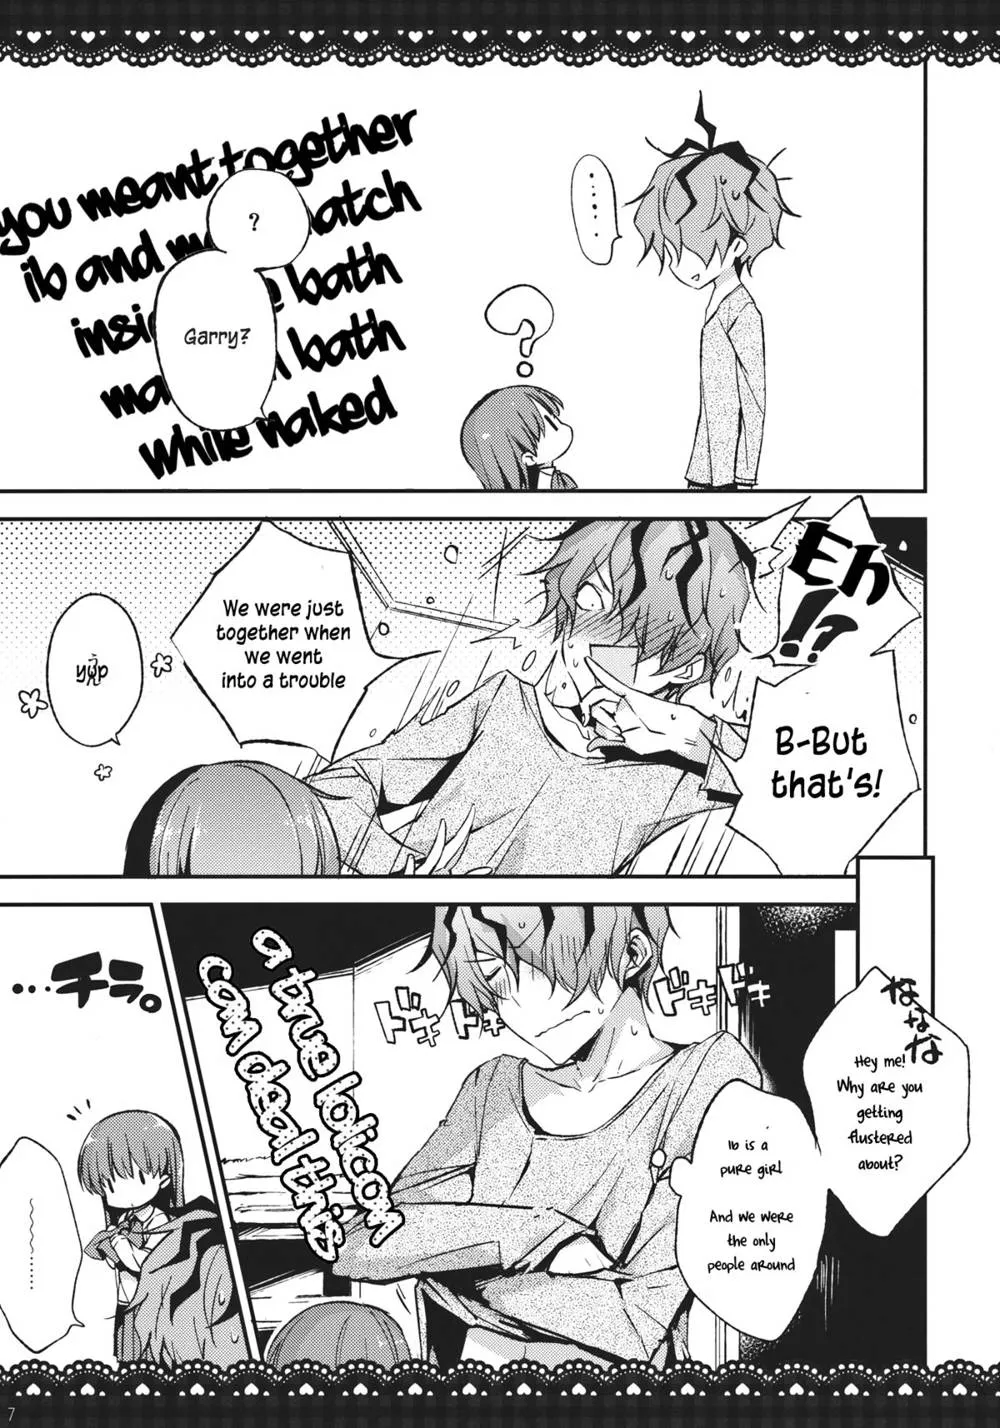 Ib,What Happens When You're In A Bath Together, Garry And Ib? [English][第6页]